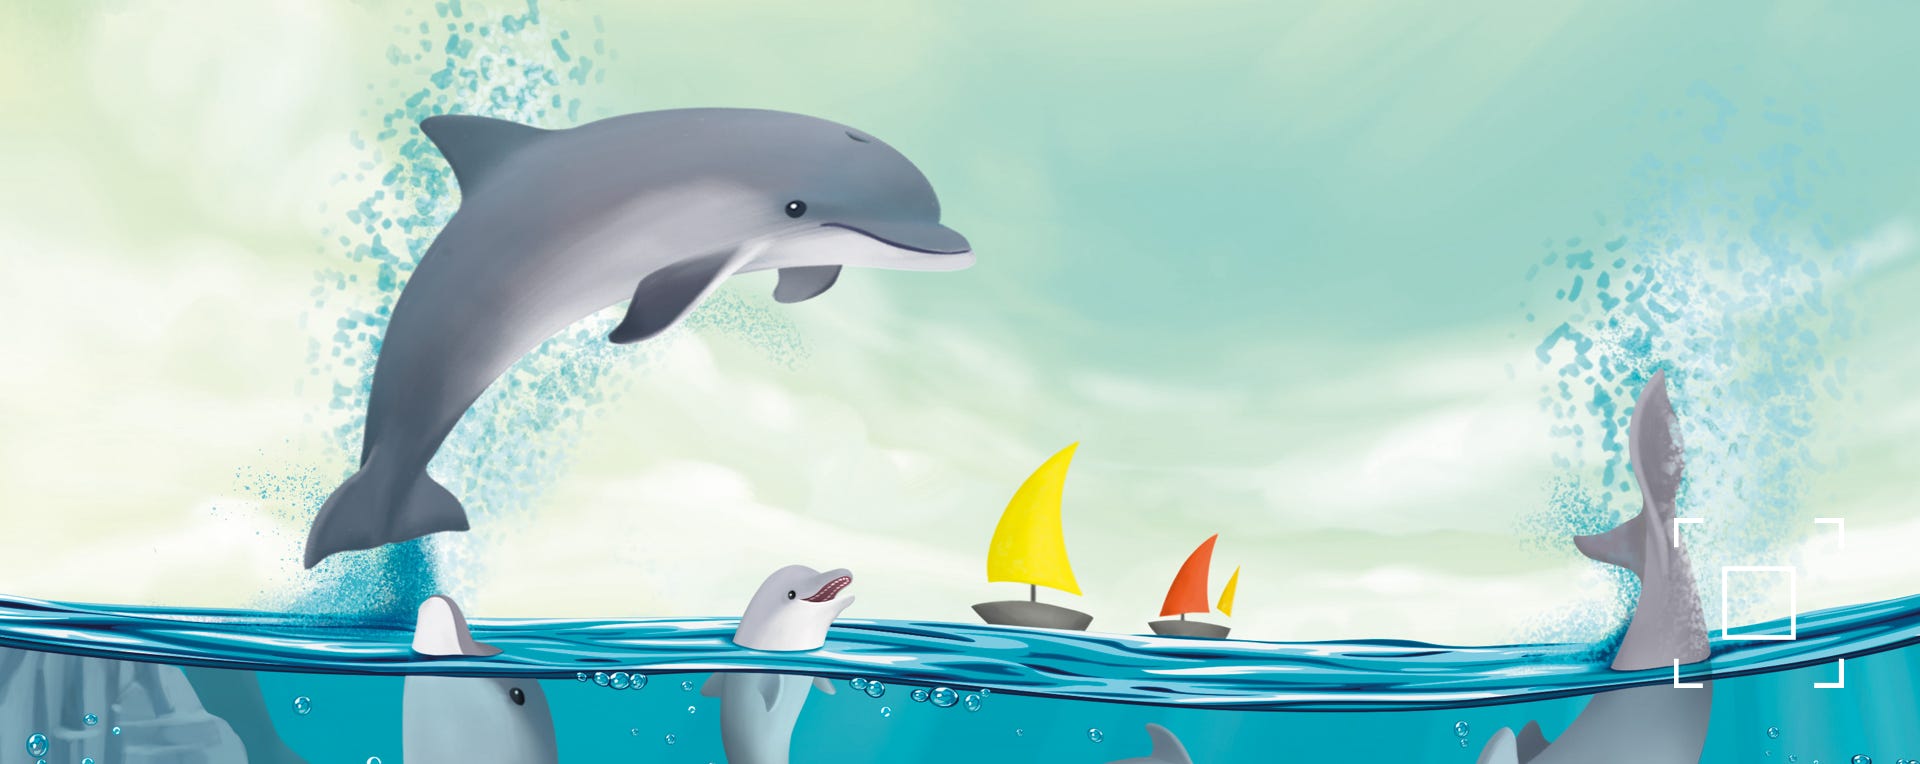 Magnetic Travel Game with dolphins on transparent puzzle pieces.